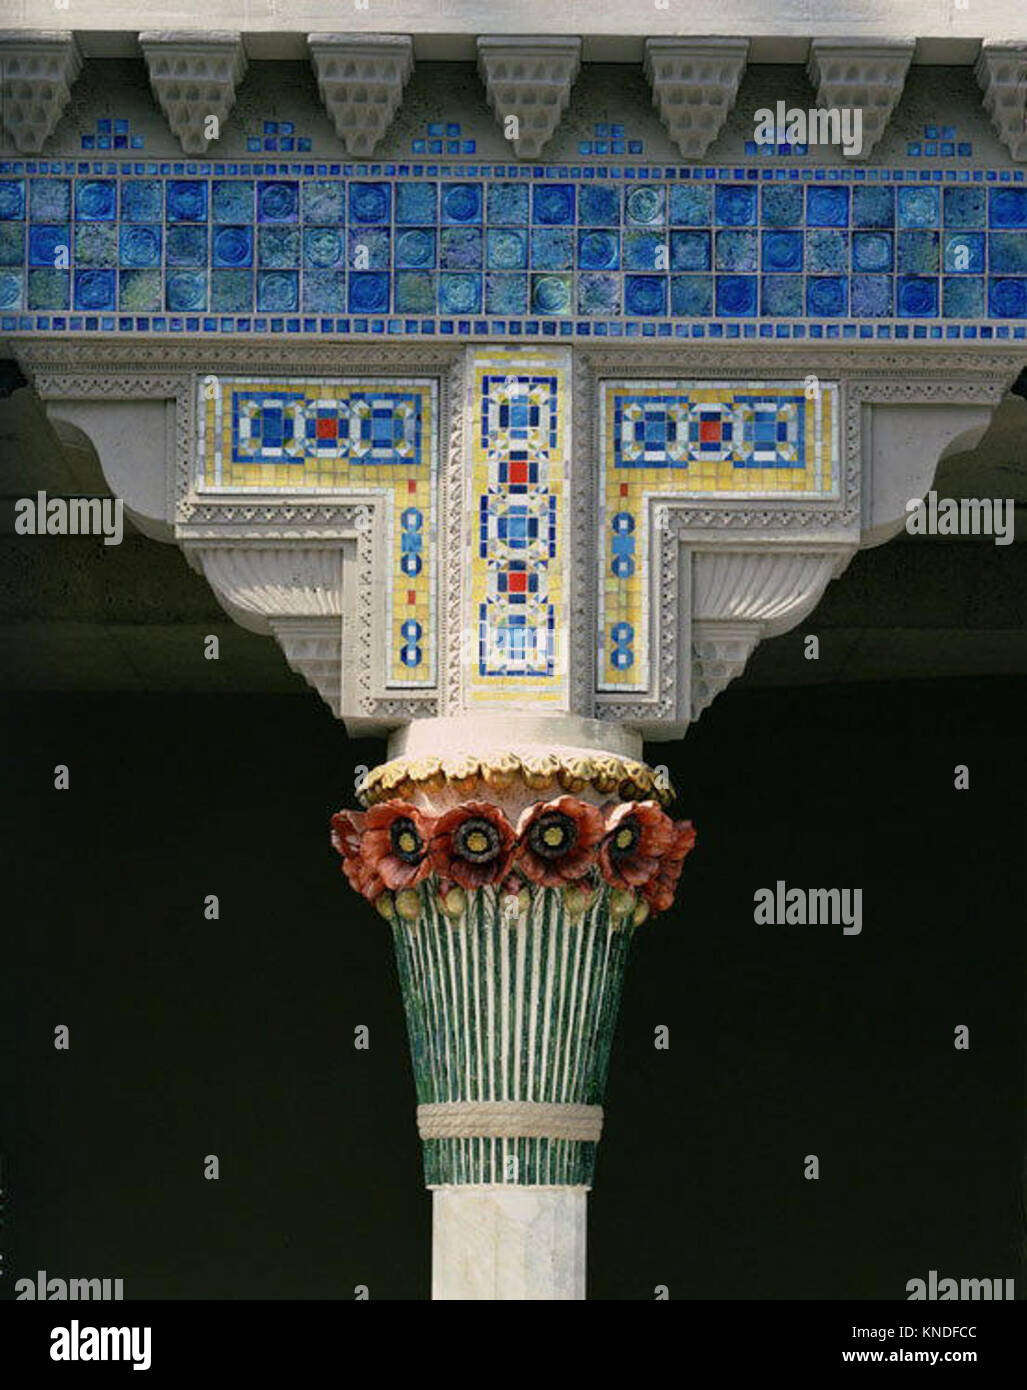 Architectural Elements from Laurelton Hall, Oyster Bay, New York MET  1978.10.1detail 133 Designer: Designed by Louis Comfort Tiffany, American,  New York 1848?1933 New York, Architectural Elements from Laurelton Hall,  Oyster Bay, New